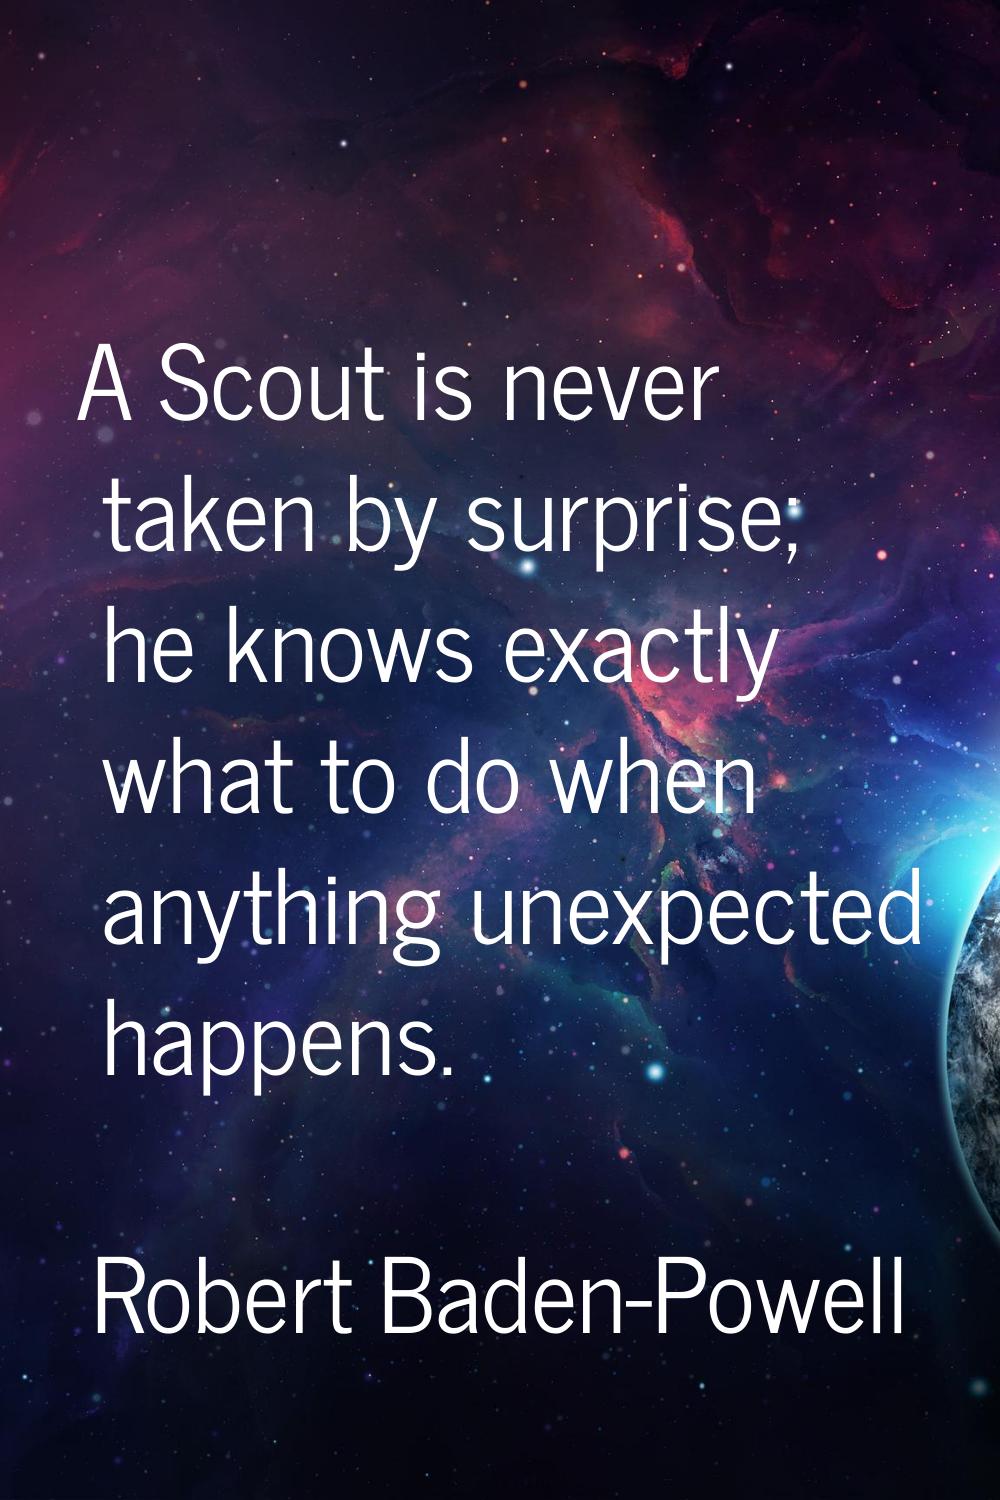 A Scout is never taken by surprise; he knows exactly what to do when anything unexpected happens.